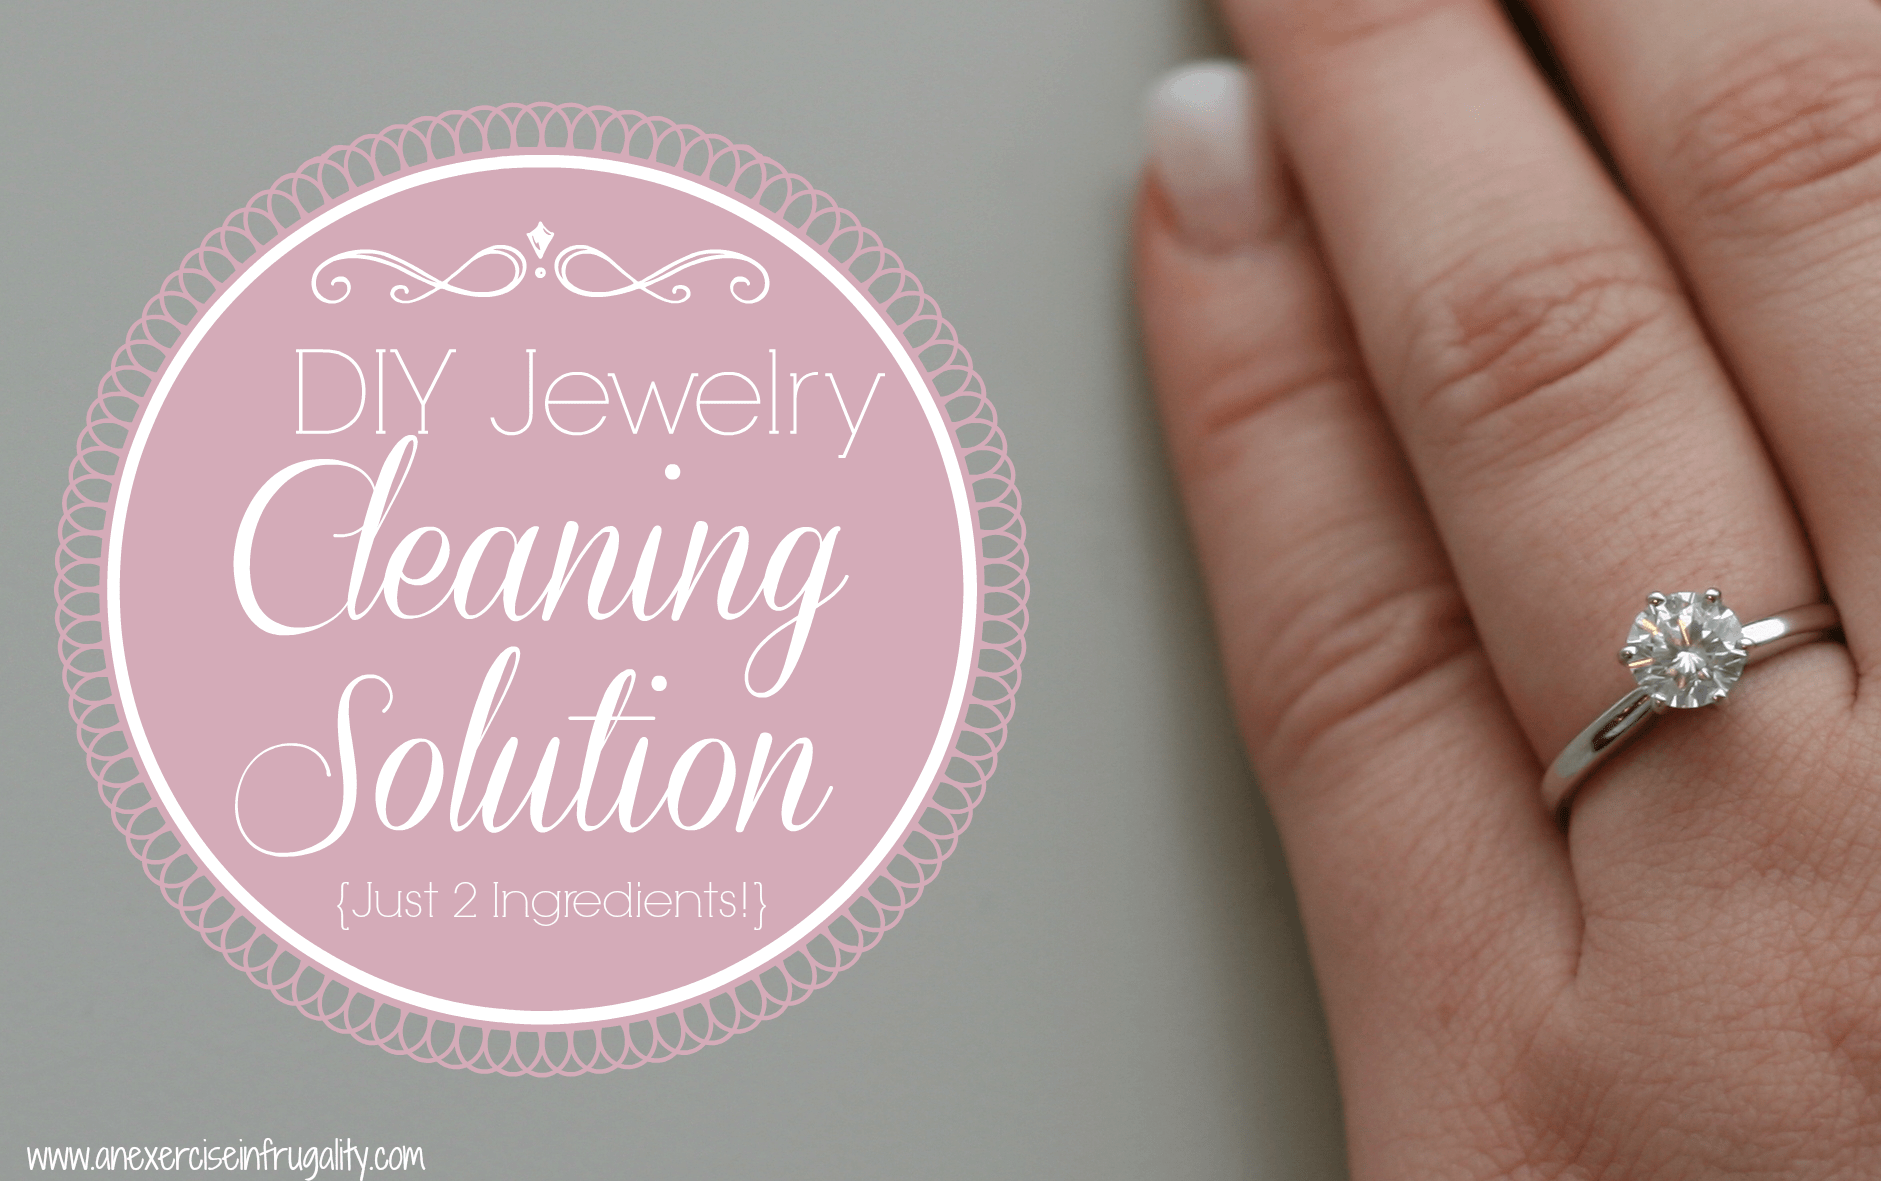 How to Clean Earrings to Keep Them Shiny and Sanitary